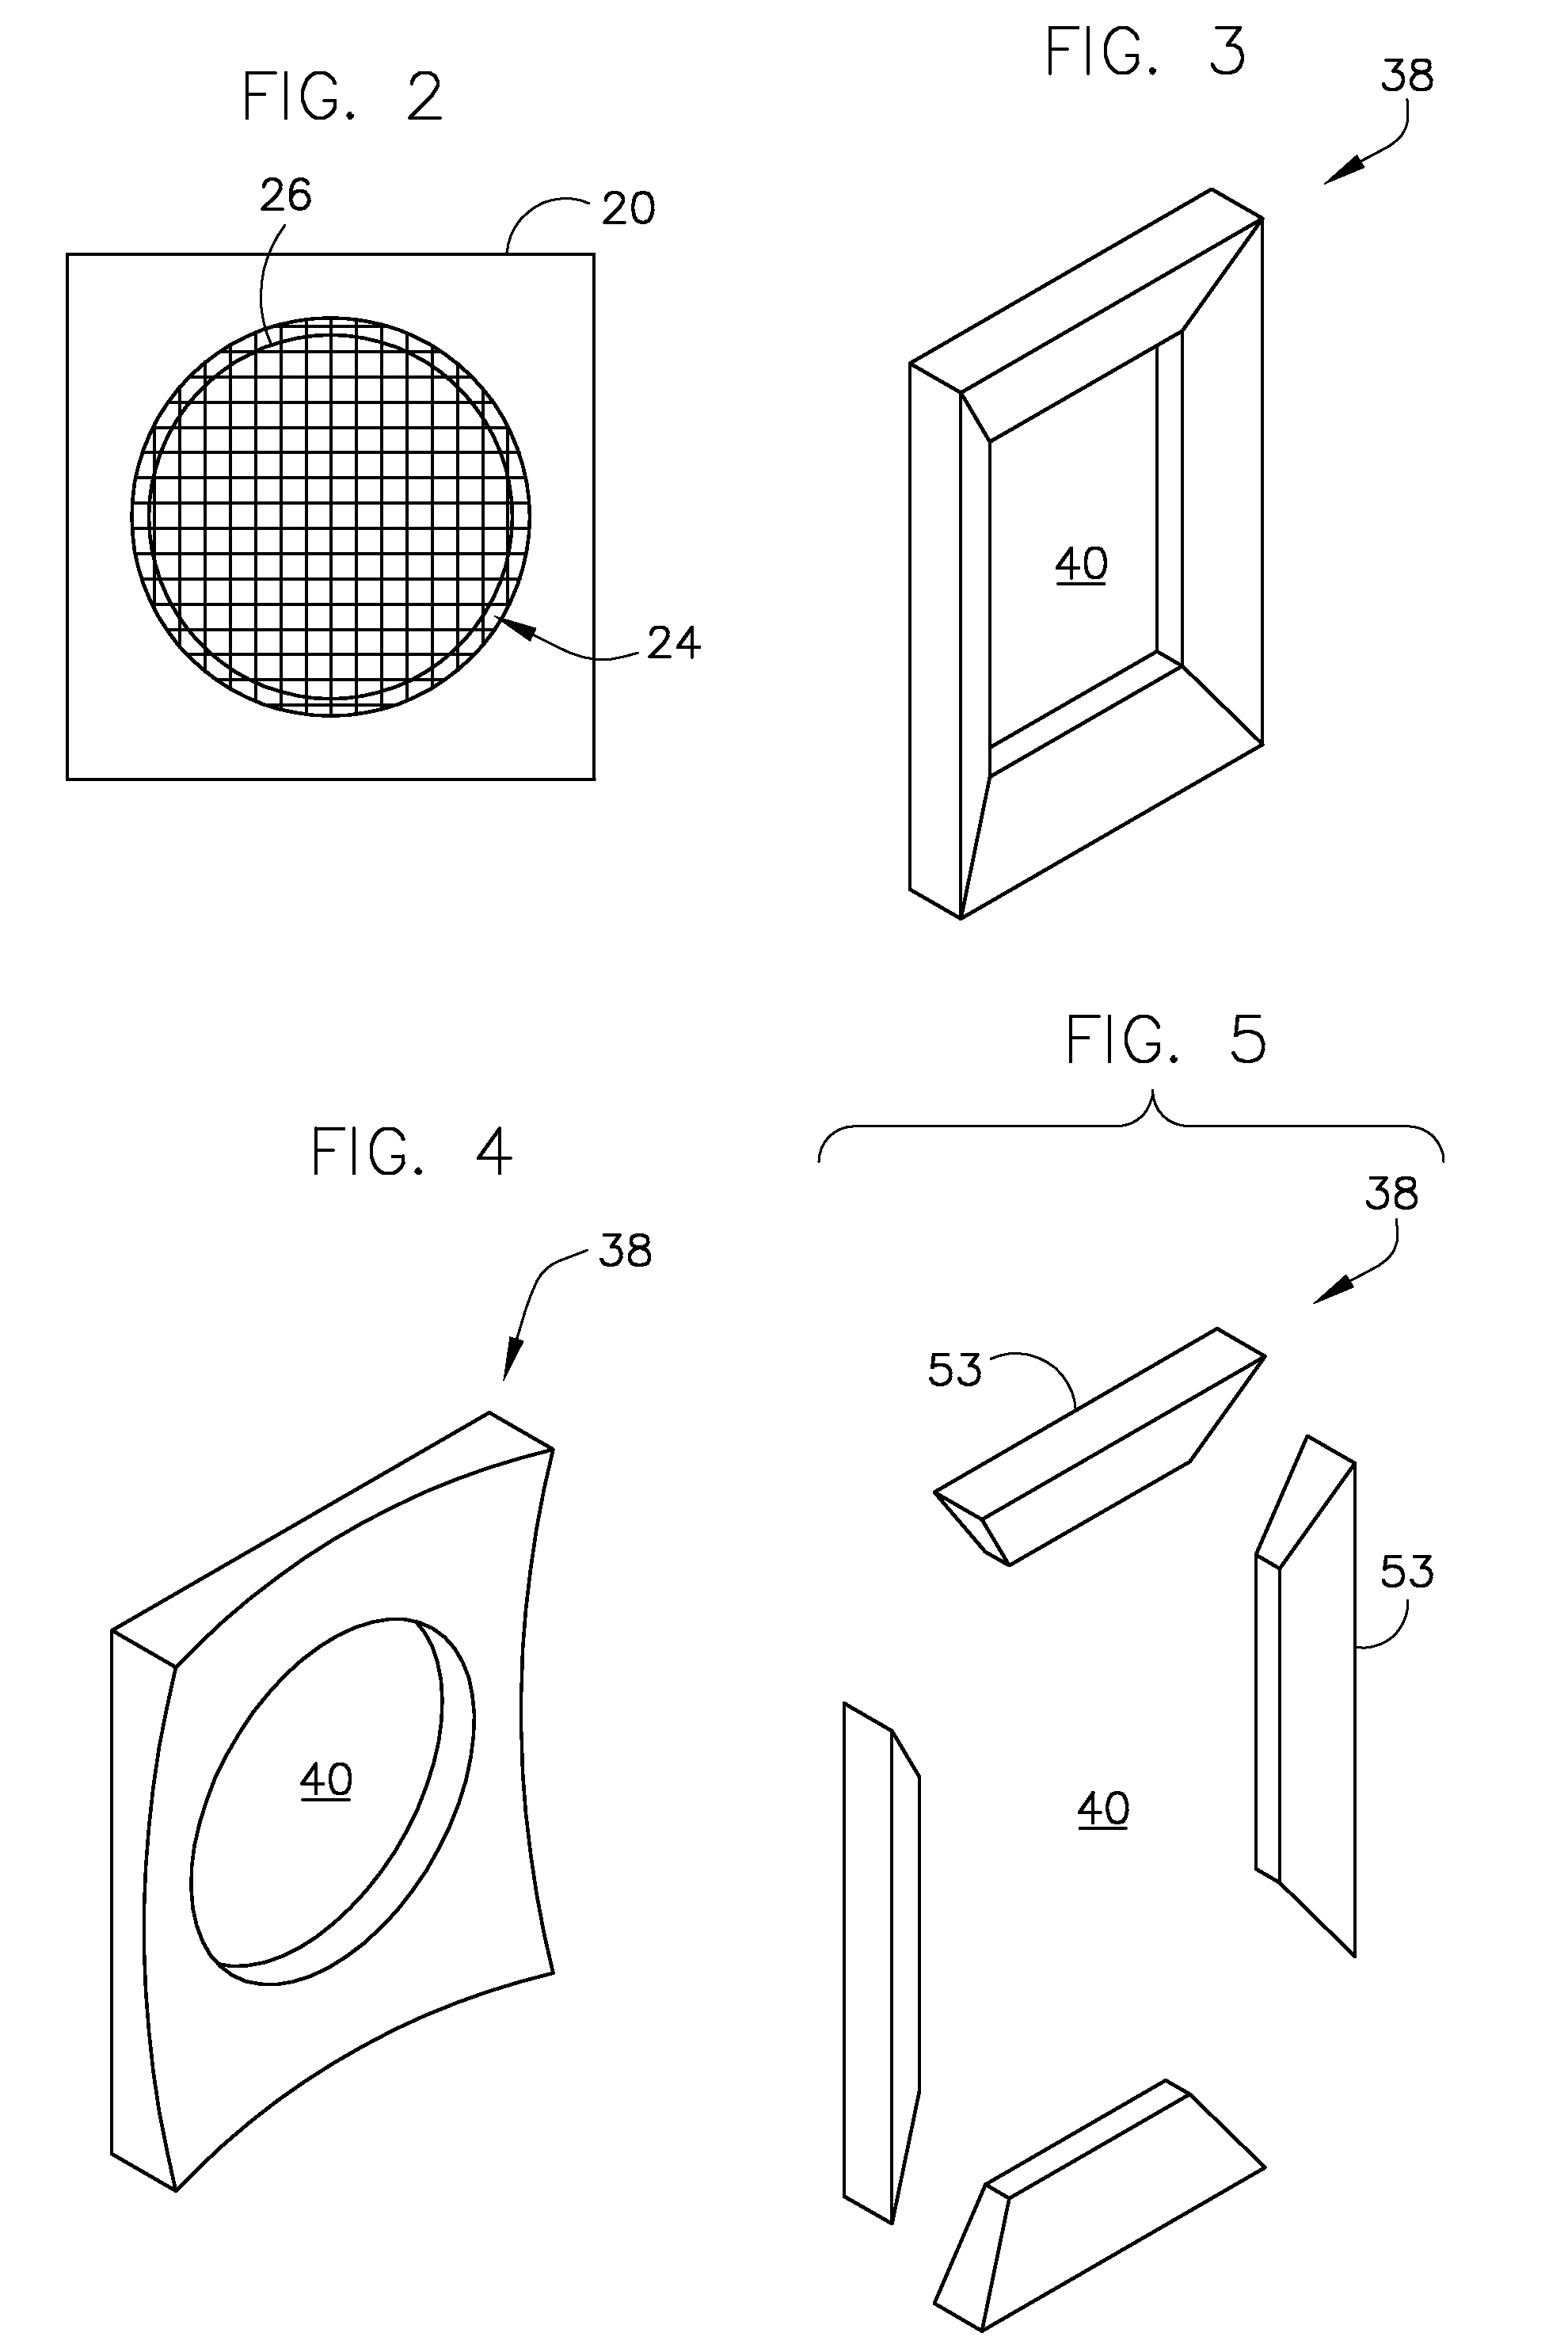 Apparatus for modifying electron beam aspect ratio for X-ray generation